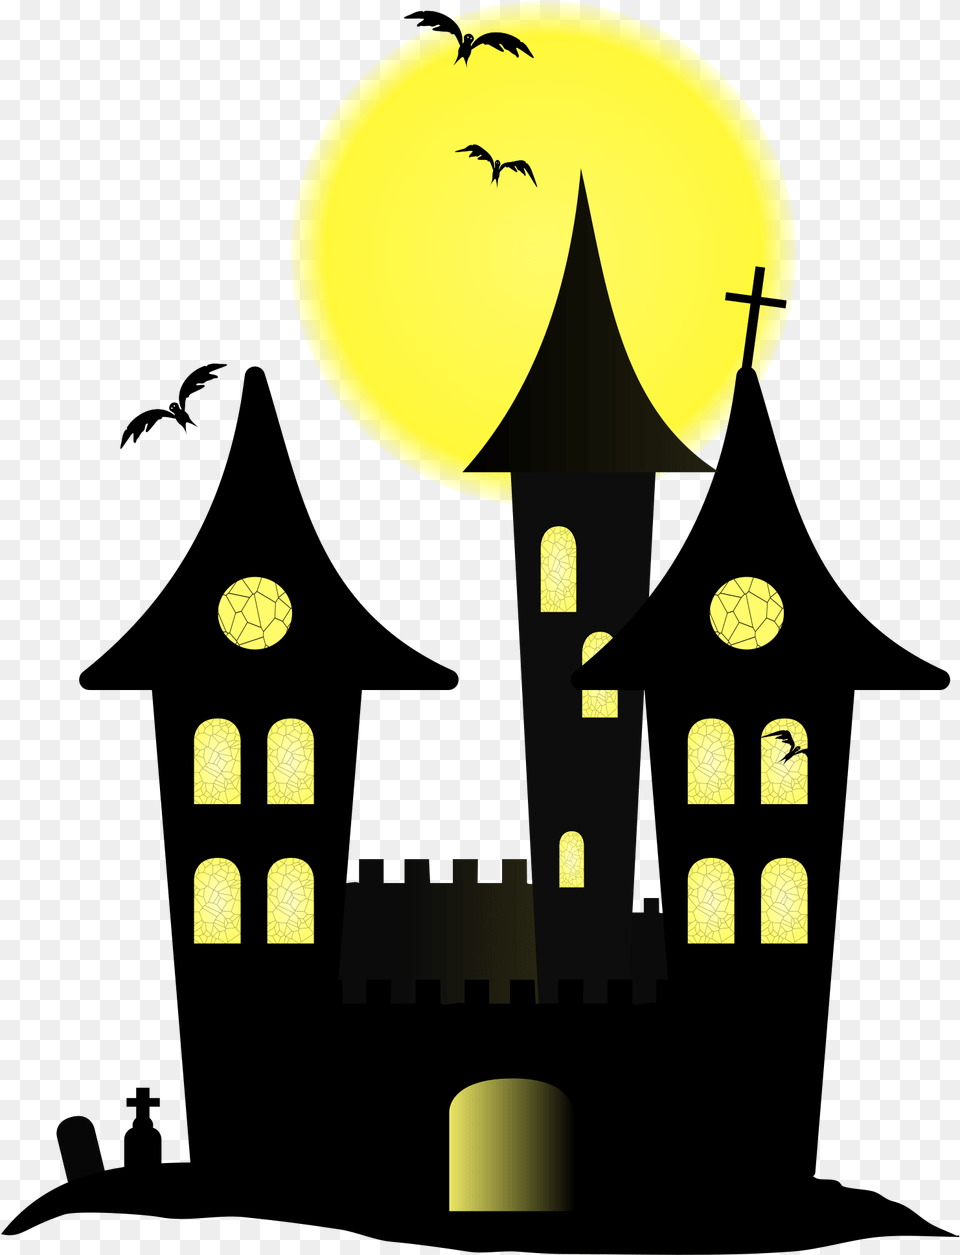 Library Of Halloween Castle Clip Art Stock Design Haunted House Cartoon, Architecture, Building, Clock Tower, Tower Free Transparent Png